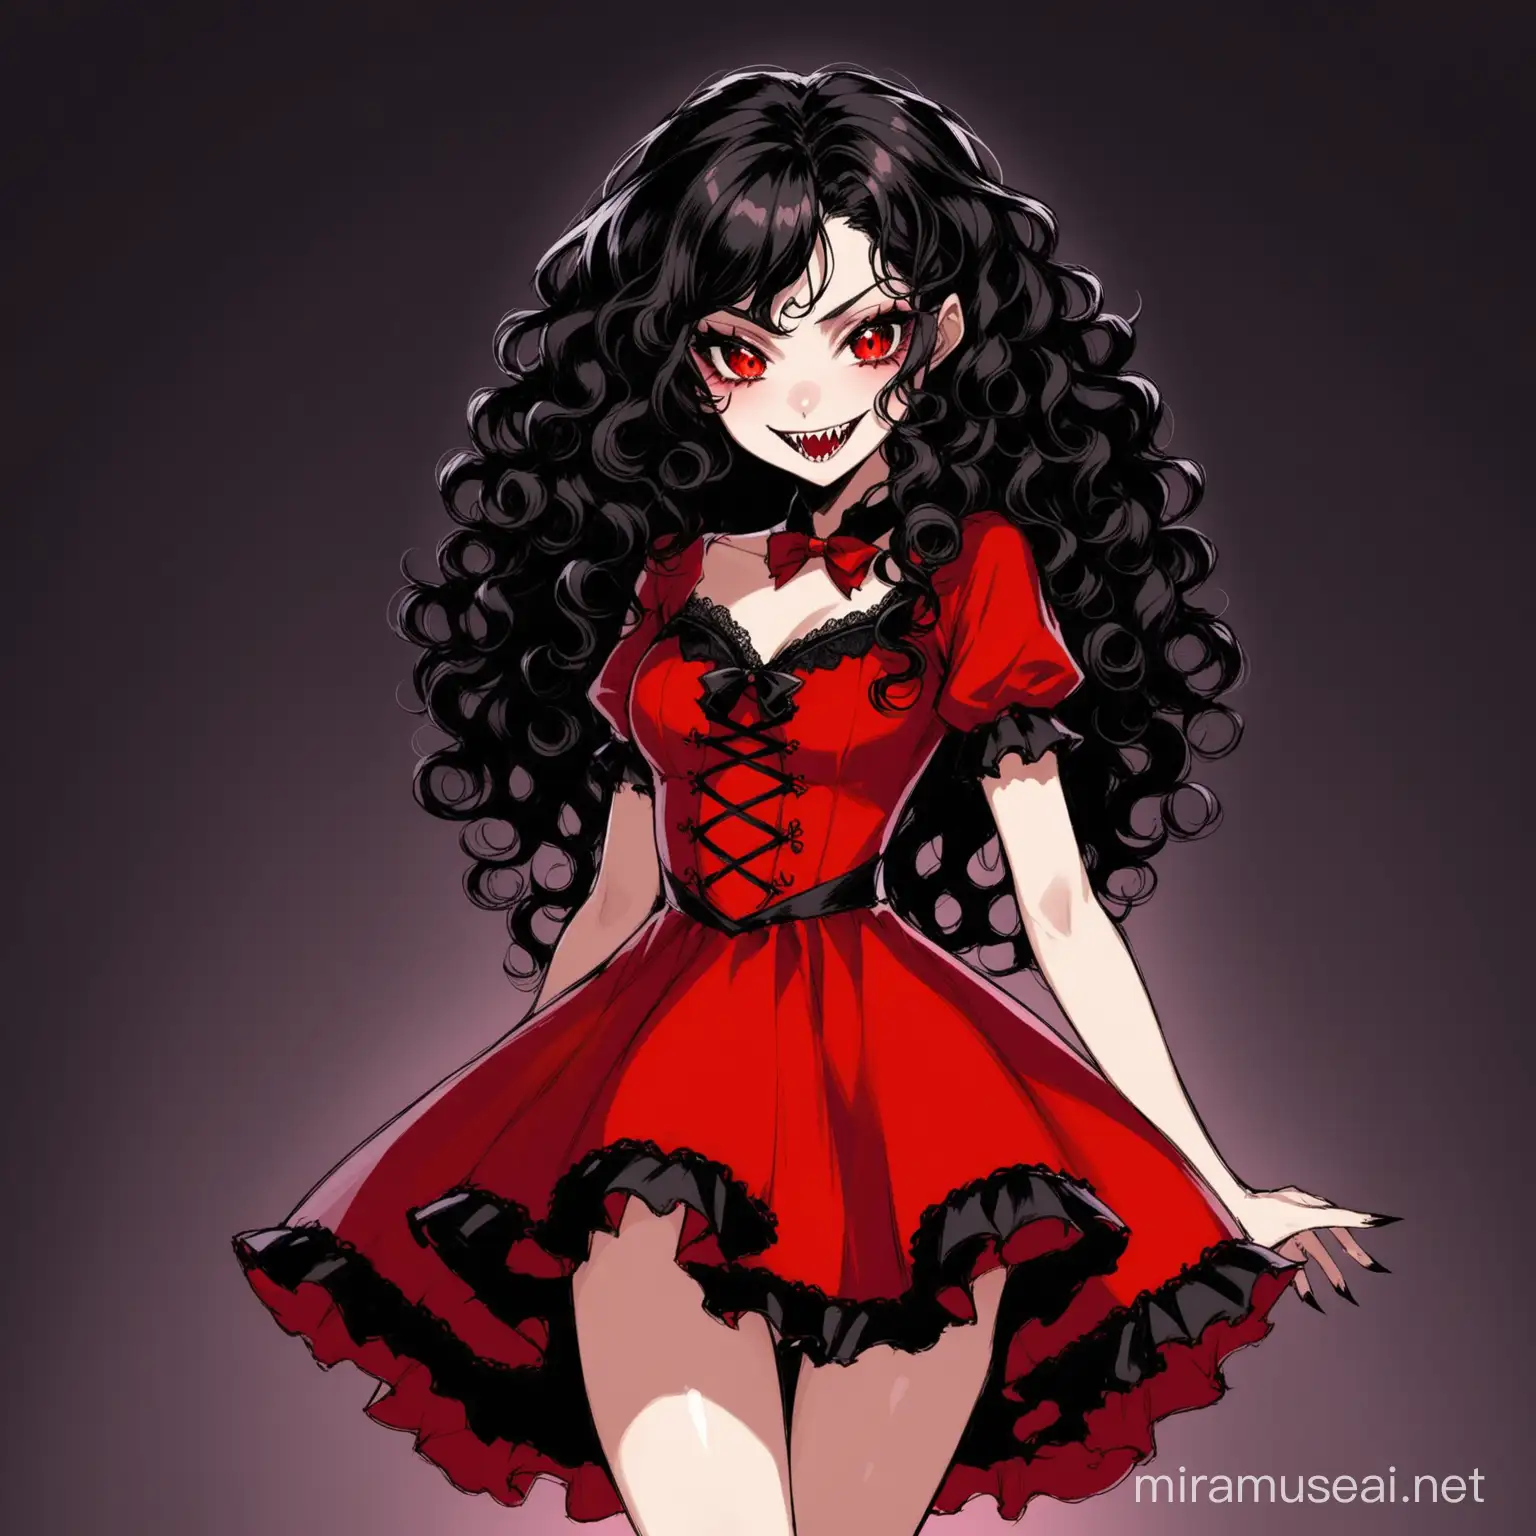 black vampire teenager, with very curly hair, a very provocative short black and red dress, she has red eyes, a malicious and sexy smile